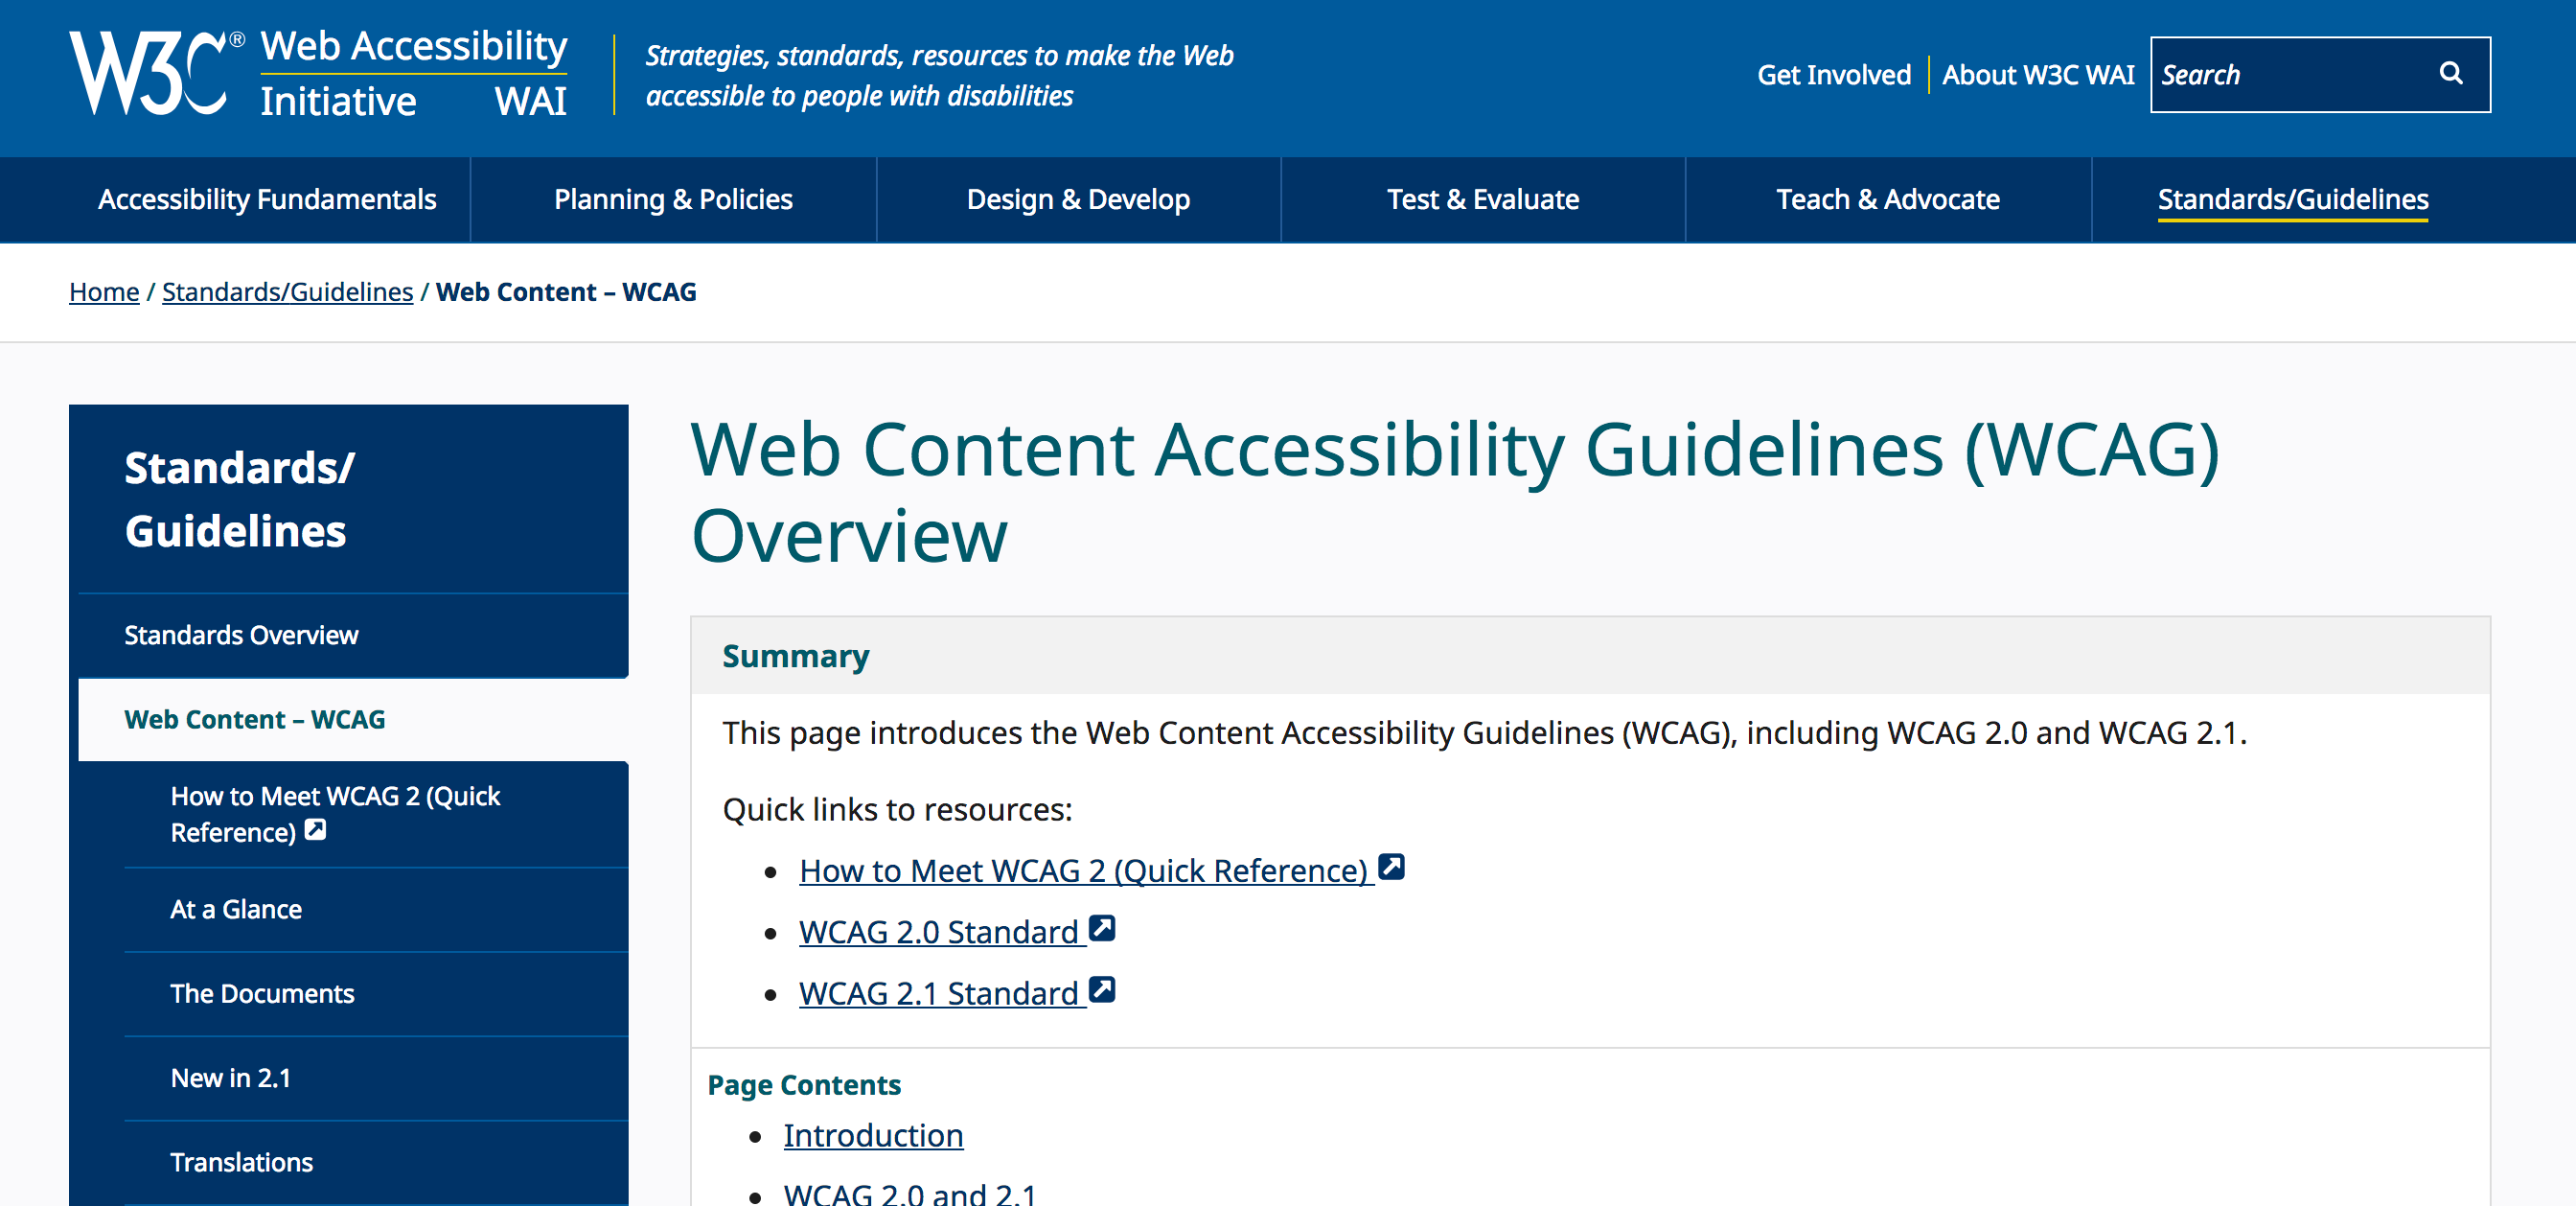 The homepage for the Web Content Accessibility Guidelines Overview